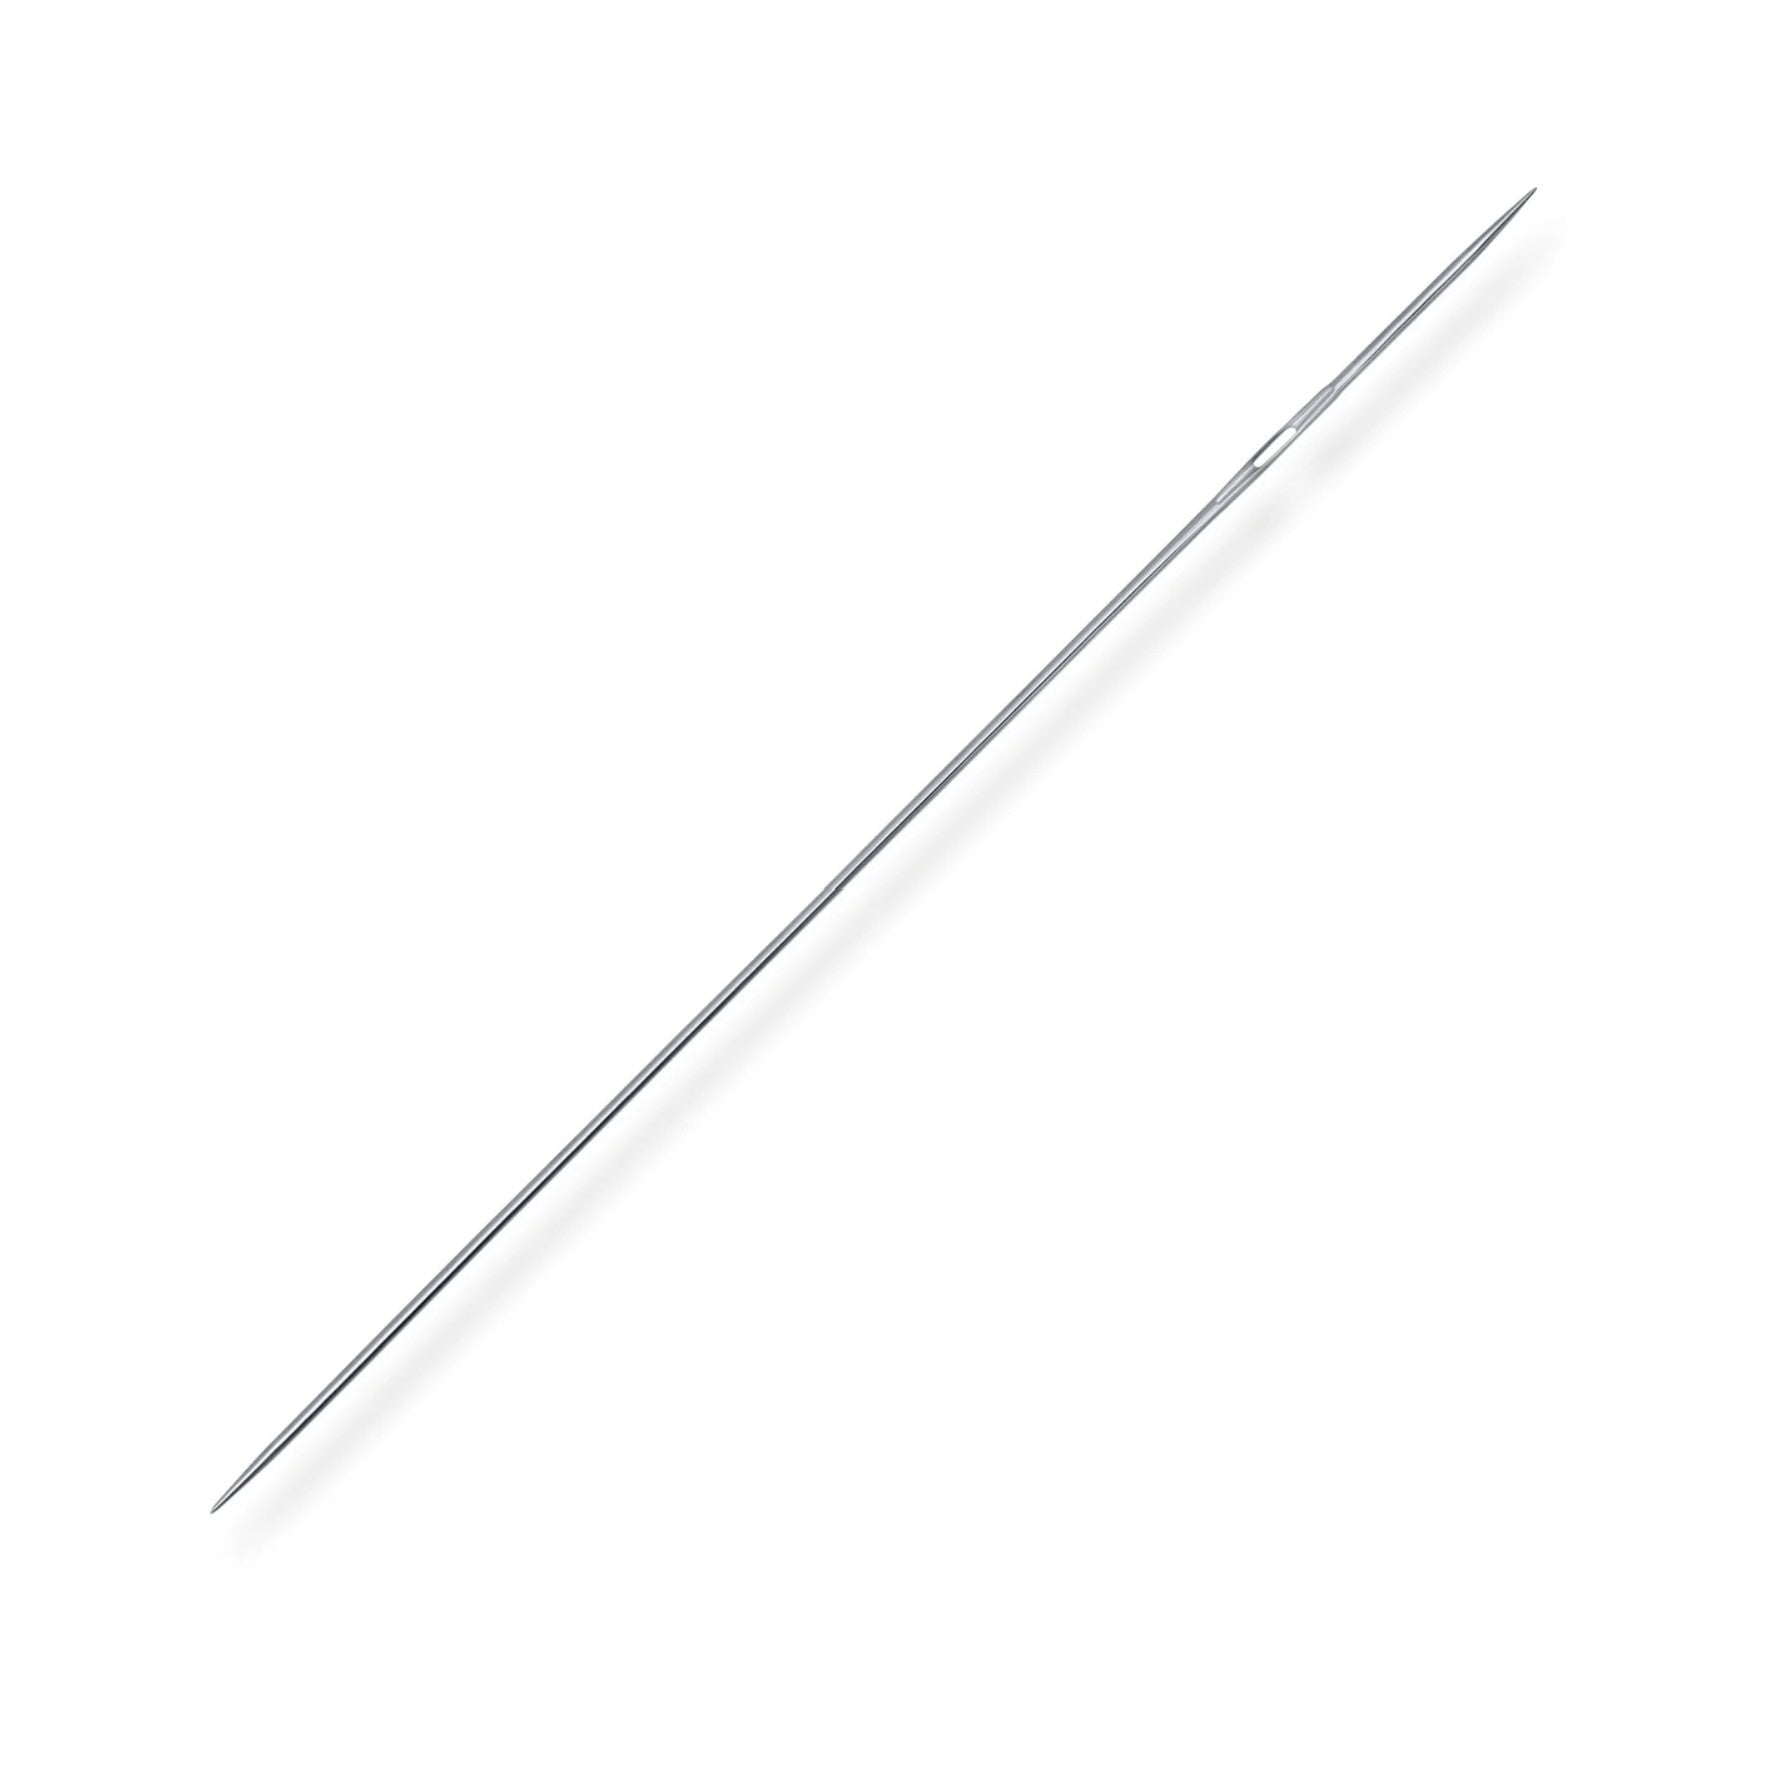 Upholstery (10"-Long Double Pointed), Hand Sewing Needle, Ref. 44010 by Dritz®